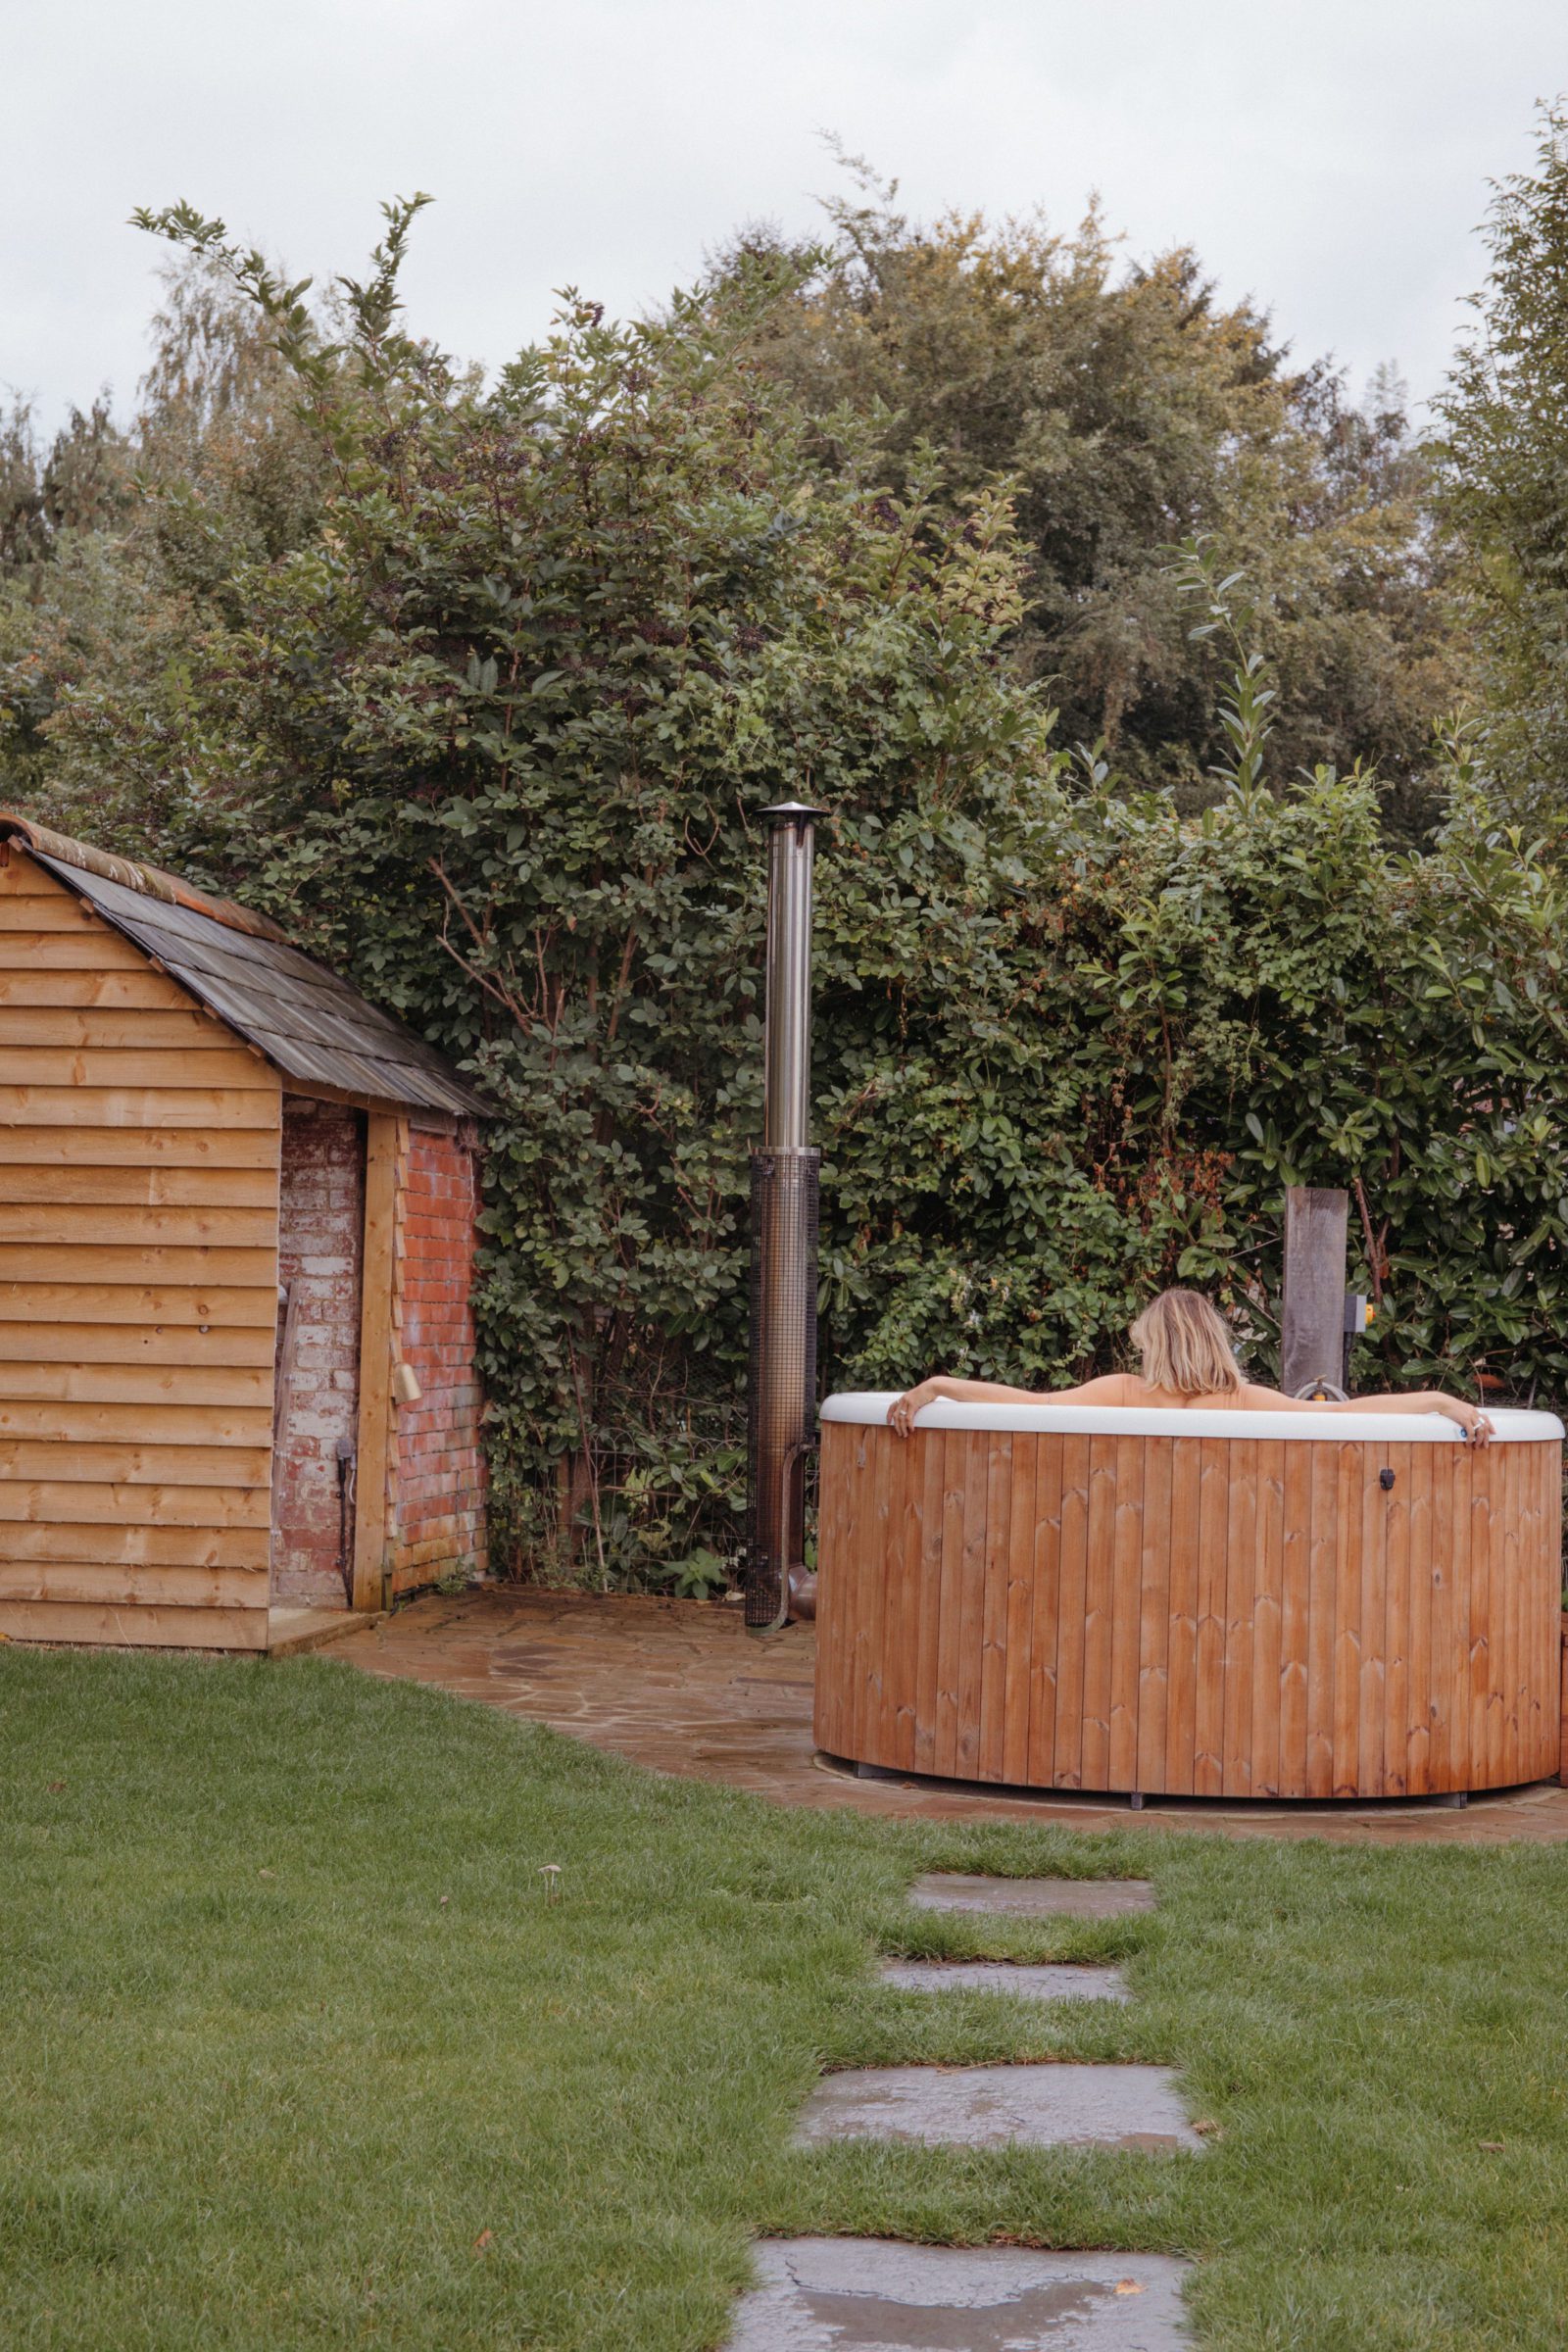 A woman in a wooden hot tub in a garden